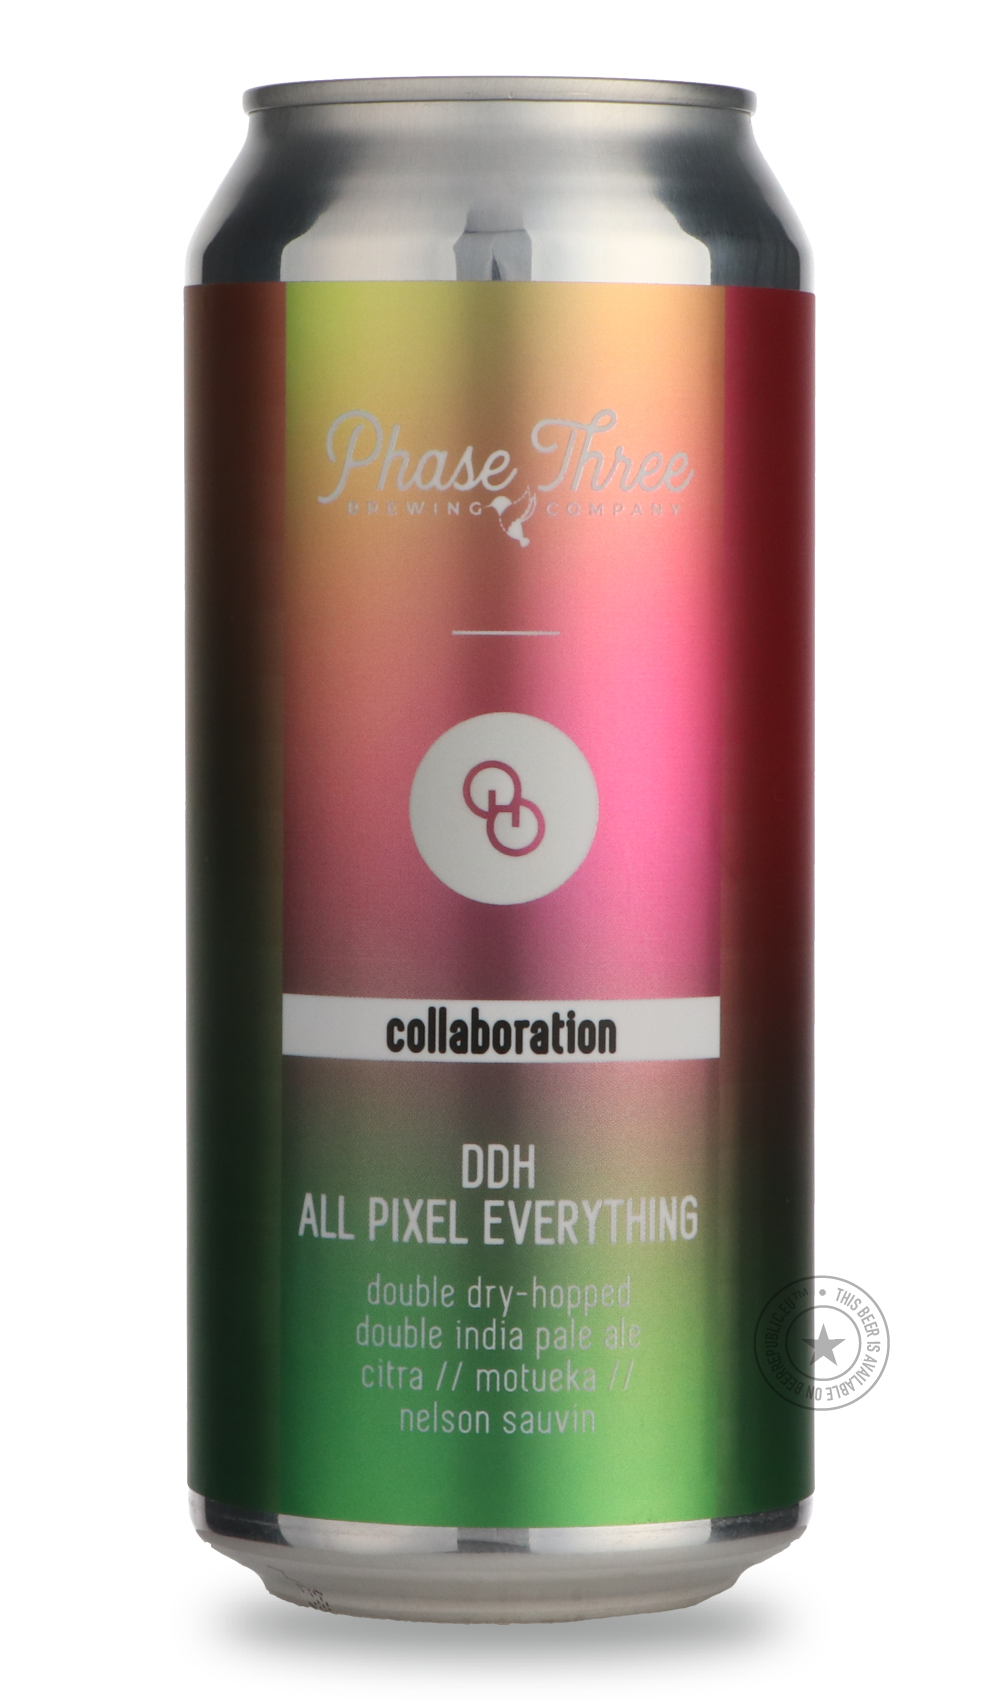 -Phase Three- DDH All Pixel Everything / Other Half-IPA- Only @ Beer Republic - The best online beer store for American & Canadian craft beer - Buy beer online from the USA and Canada - Bier online kopen - Amerikaans bier kopen - Craft beer store - Craft beer kopen - Amerikanisch bier kaufen - Bier online kaufen - Acheter biere online - IPA - Stout - Porter - New England IPA - Hazy IPA - Imperial Stout - Barrel Aged - Barrel Aged Imperial Stout - Brown - Dark beer - Blond - Blonde - Pilsner - Lager - Wheat 